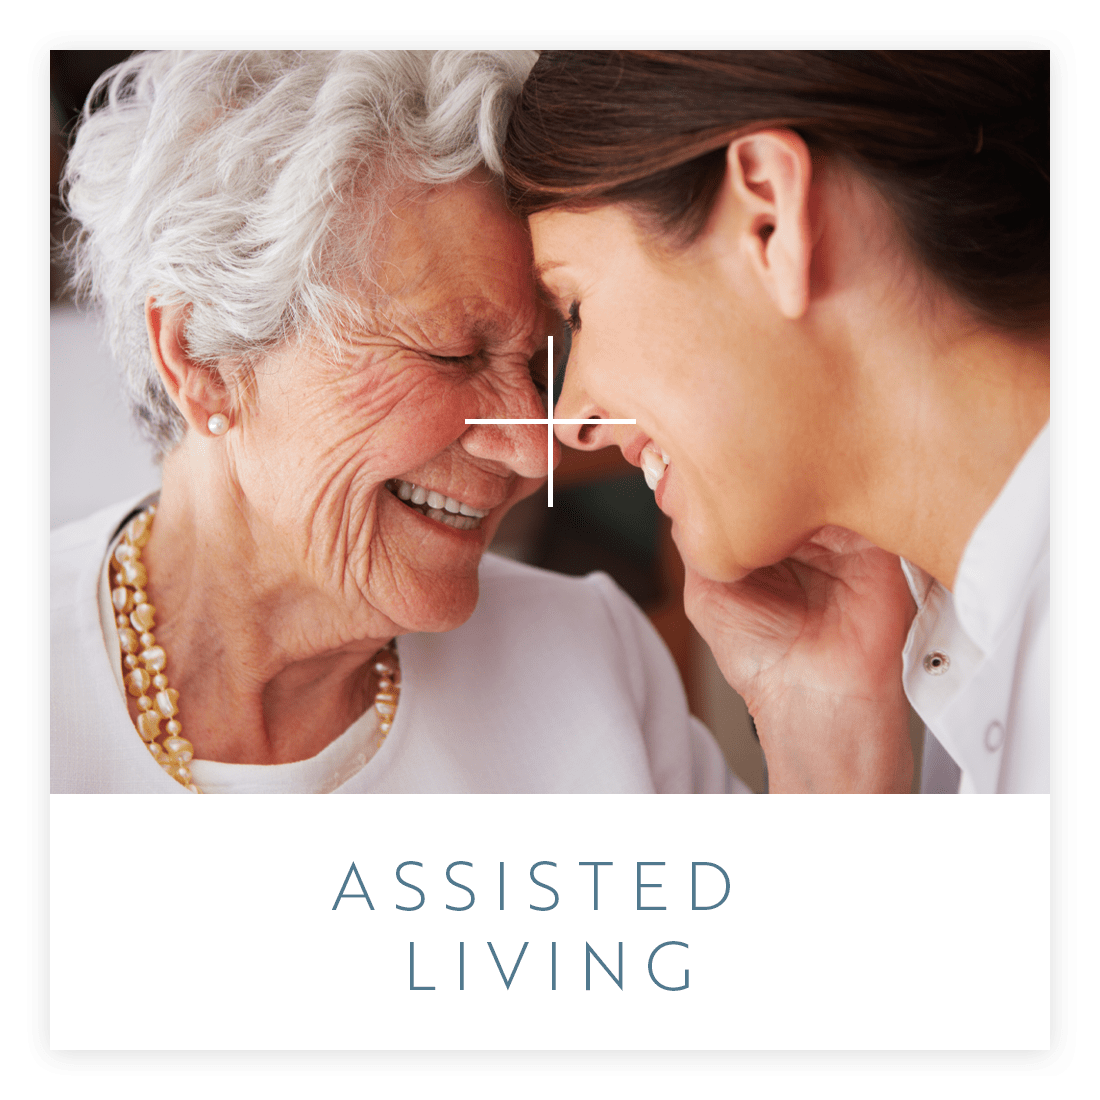 View our Assisted Living services at The Meridian at Punta Gorda Isles in Punta Gorda, Florida